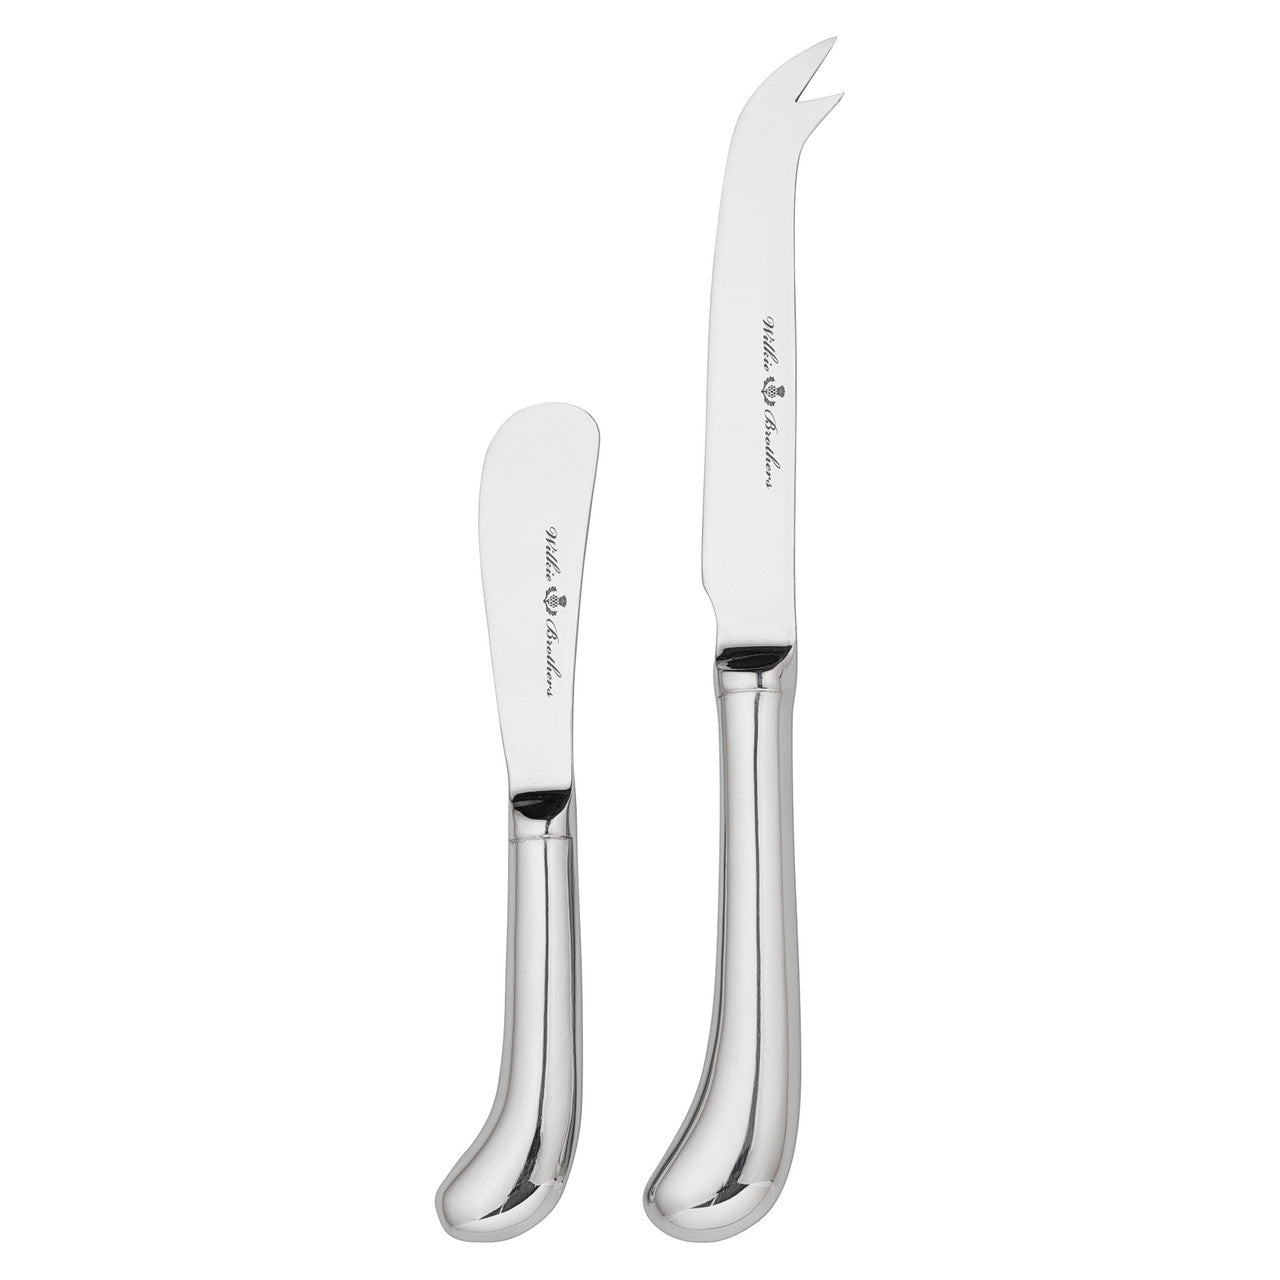 Stirling 2 Piece Cheese Set